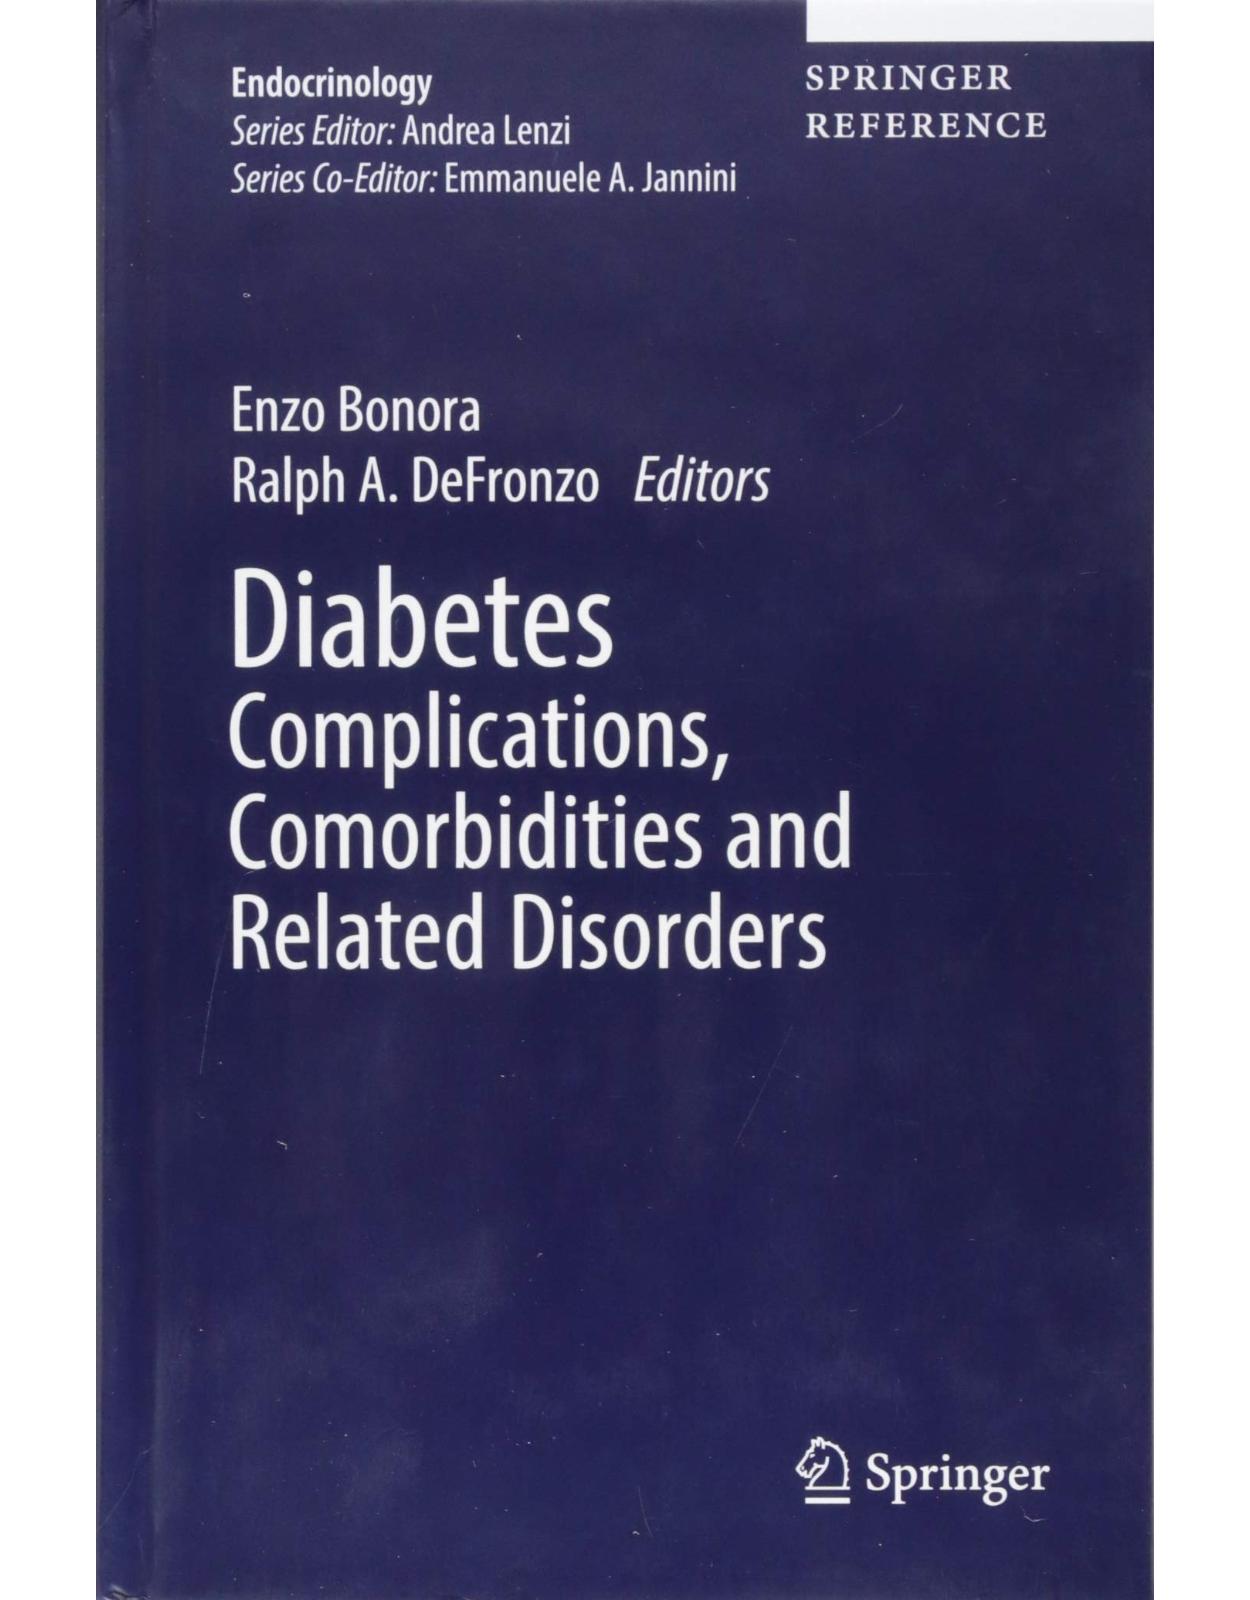 Diabetes Complications, Comorbidities and Related Disorders 